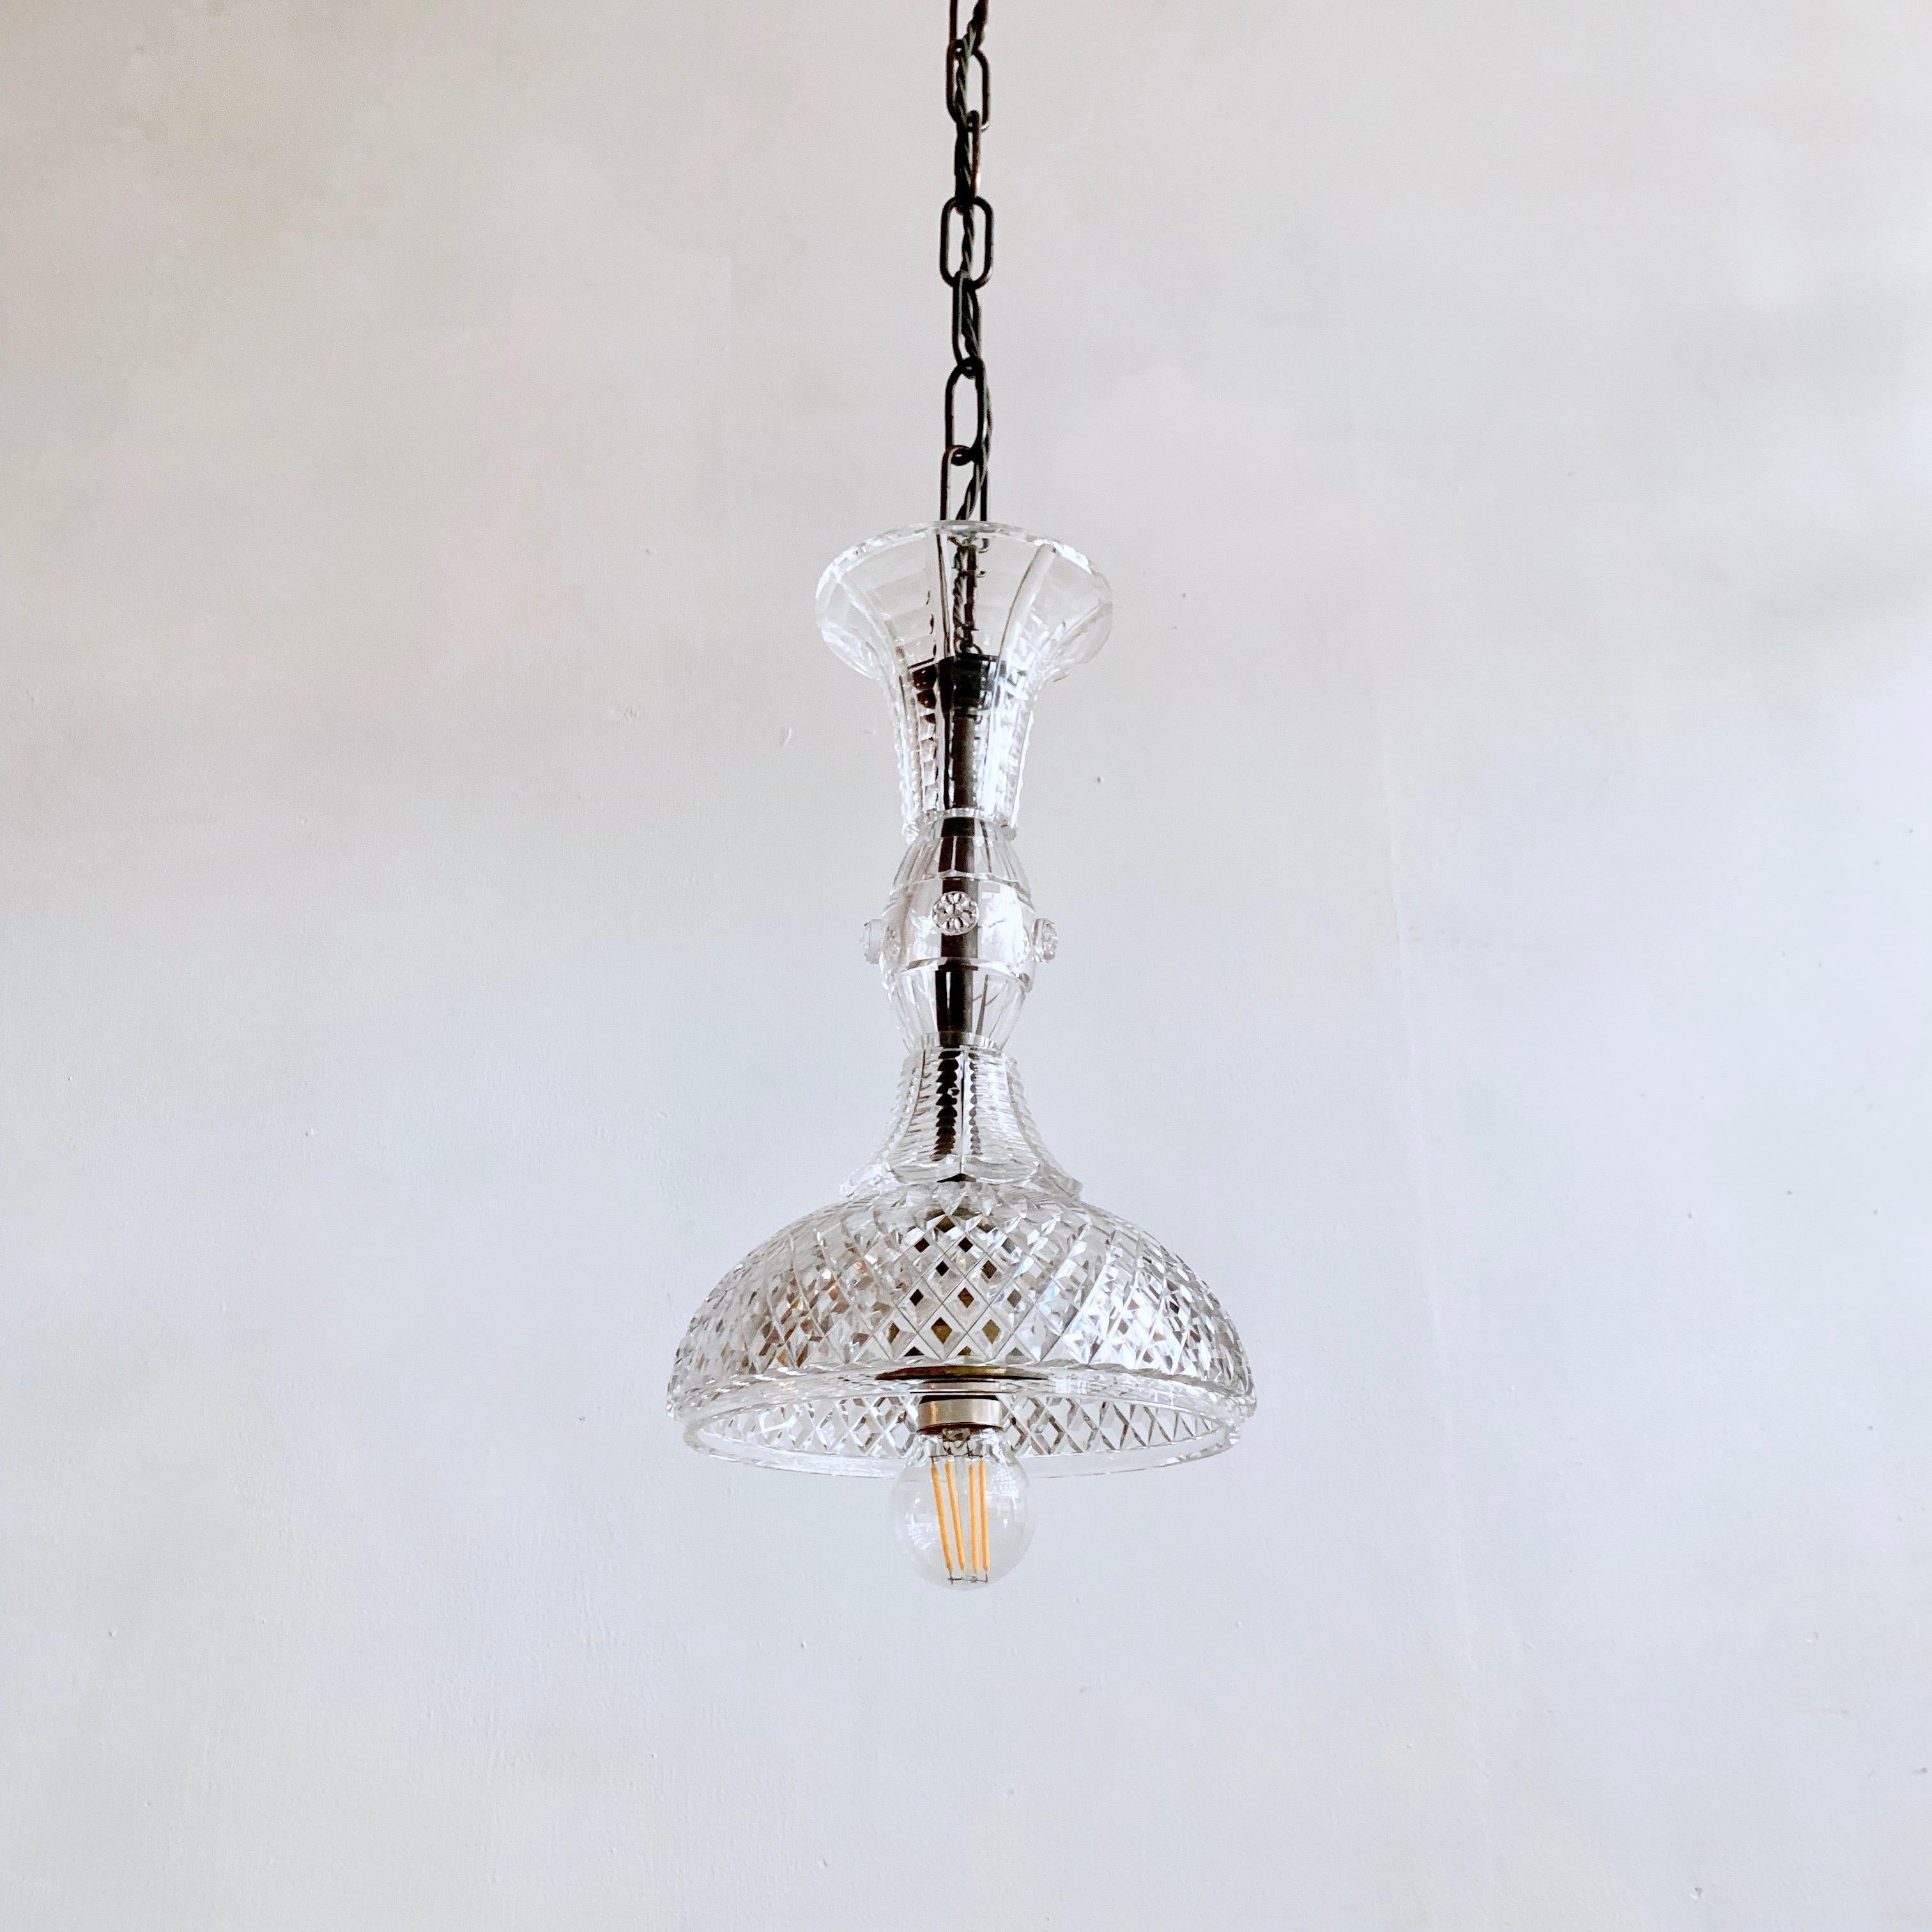 This pendant has been made with stacked antique English crystal chandelier parts, mostly ones that would usually go on the central stem of a chandelier. Each pendant is bespoke. The pendant requires a single B22 lamp. The pendant comes supplied with